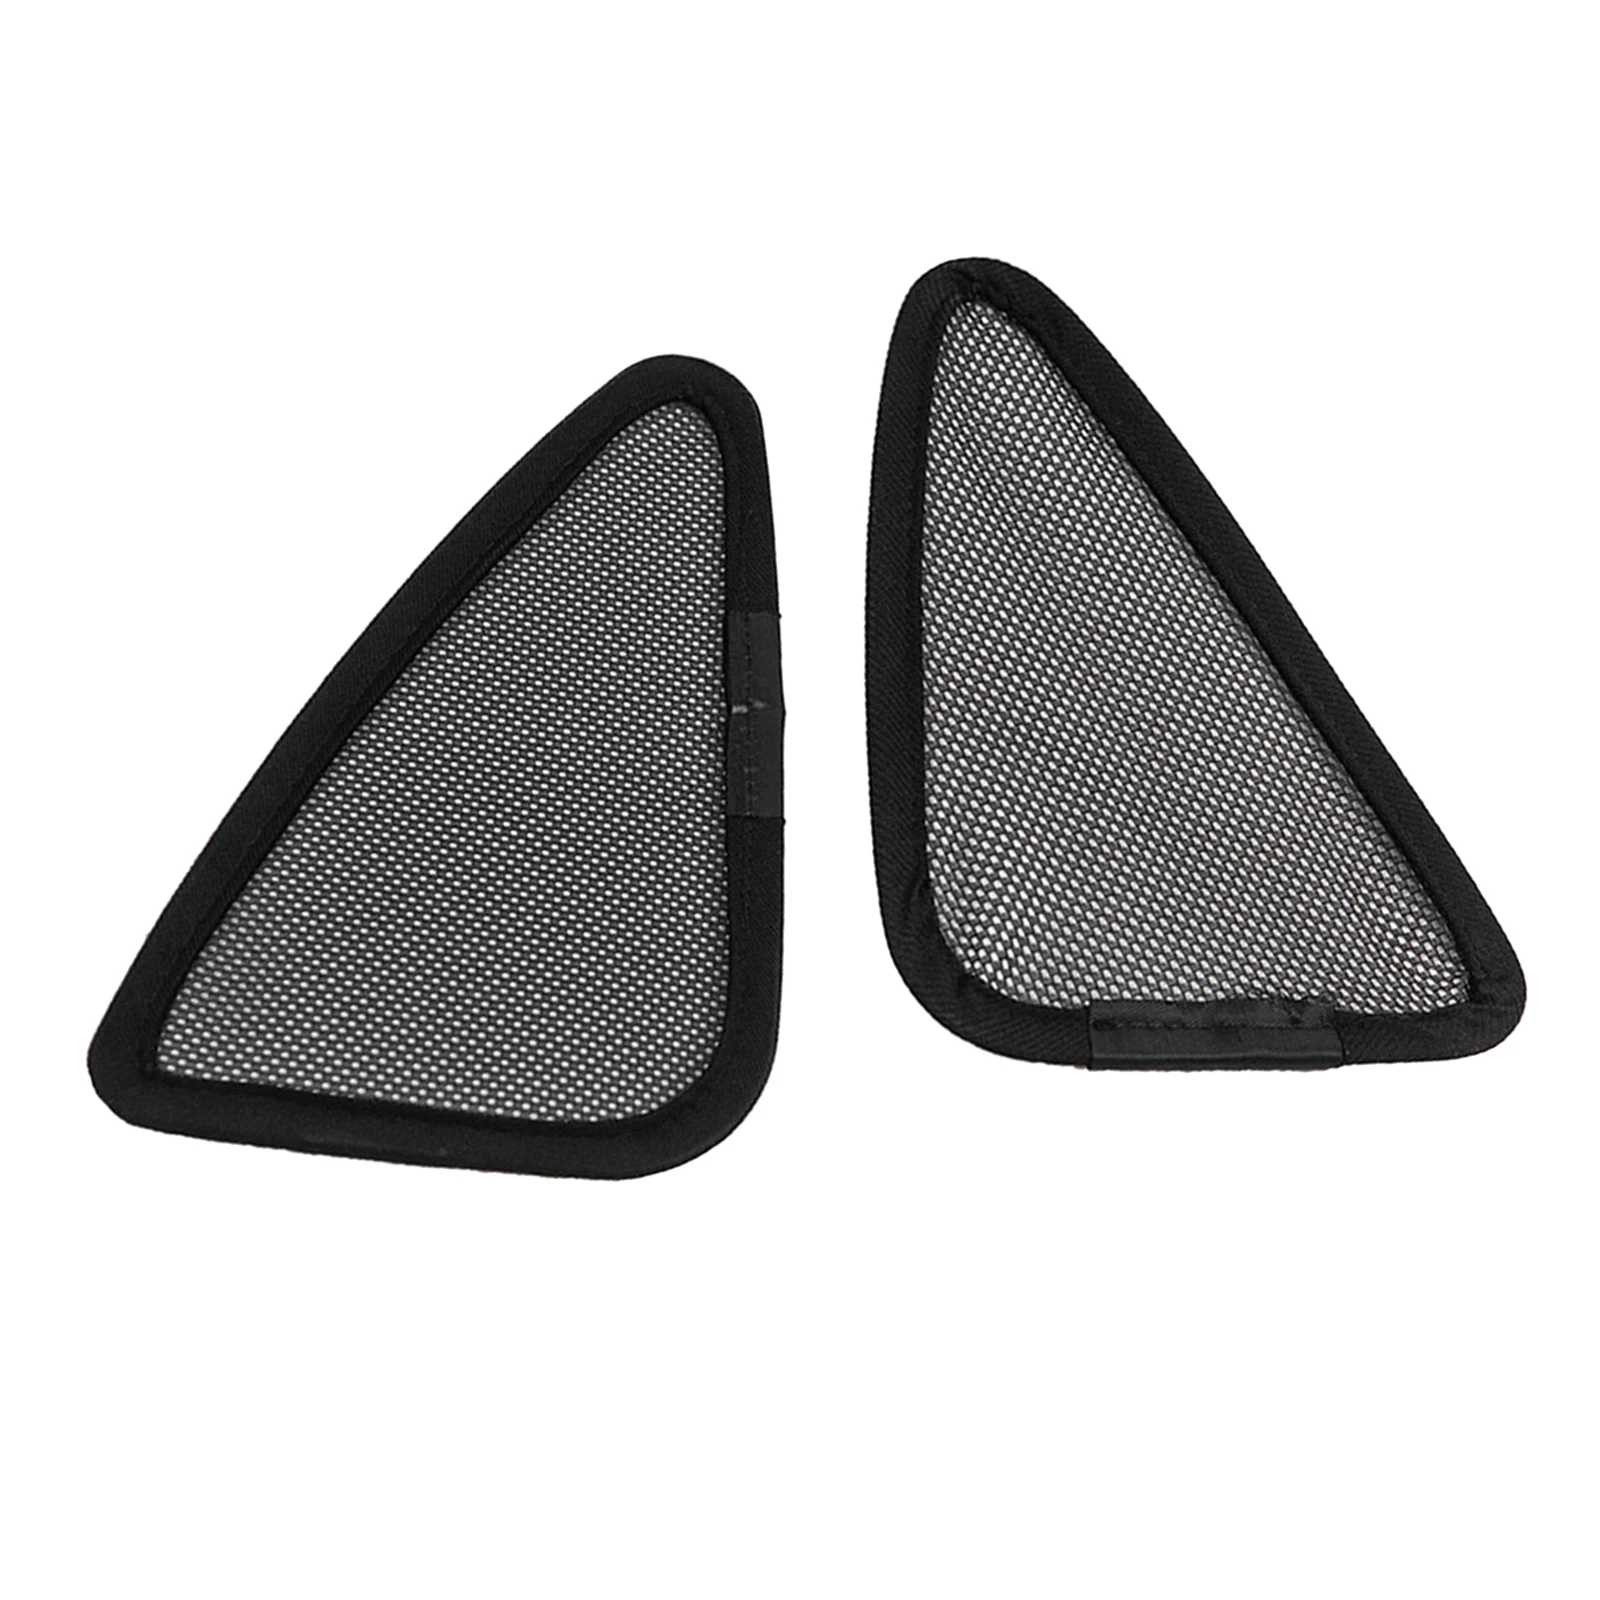 2x Car Sunshade Cover Triangular Protector for Tesla Model 3 Accessories